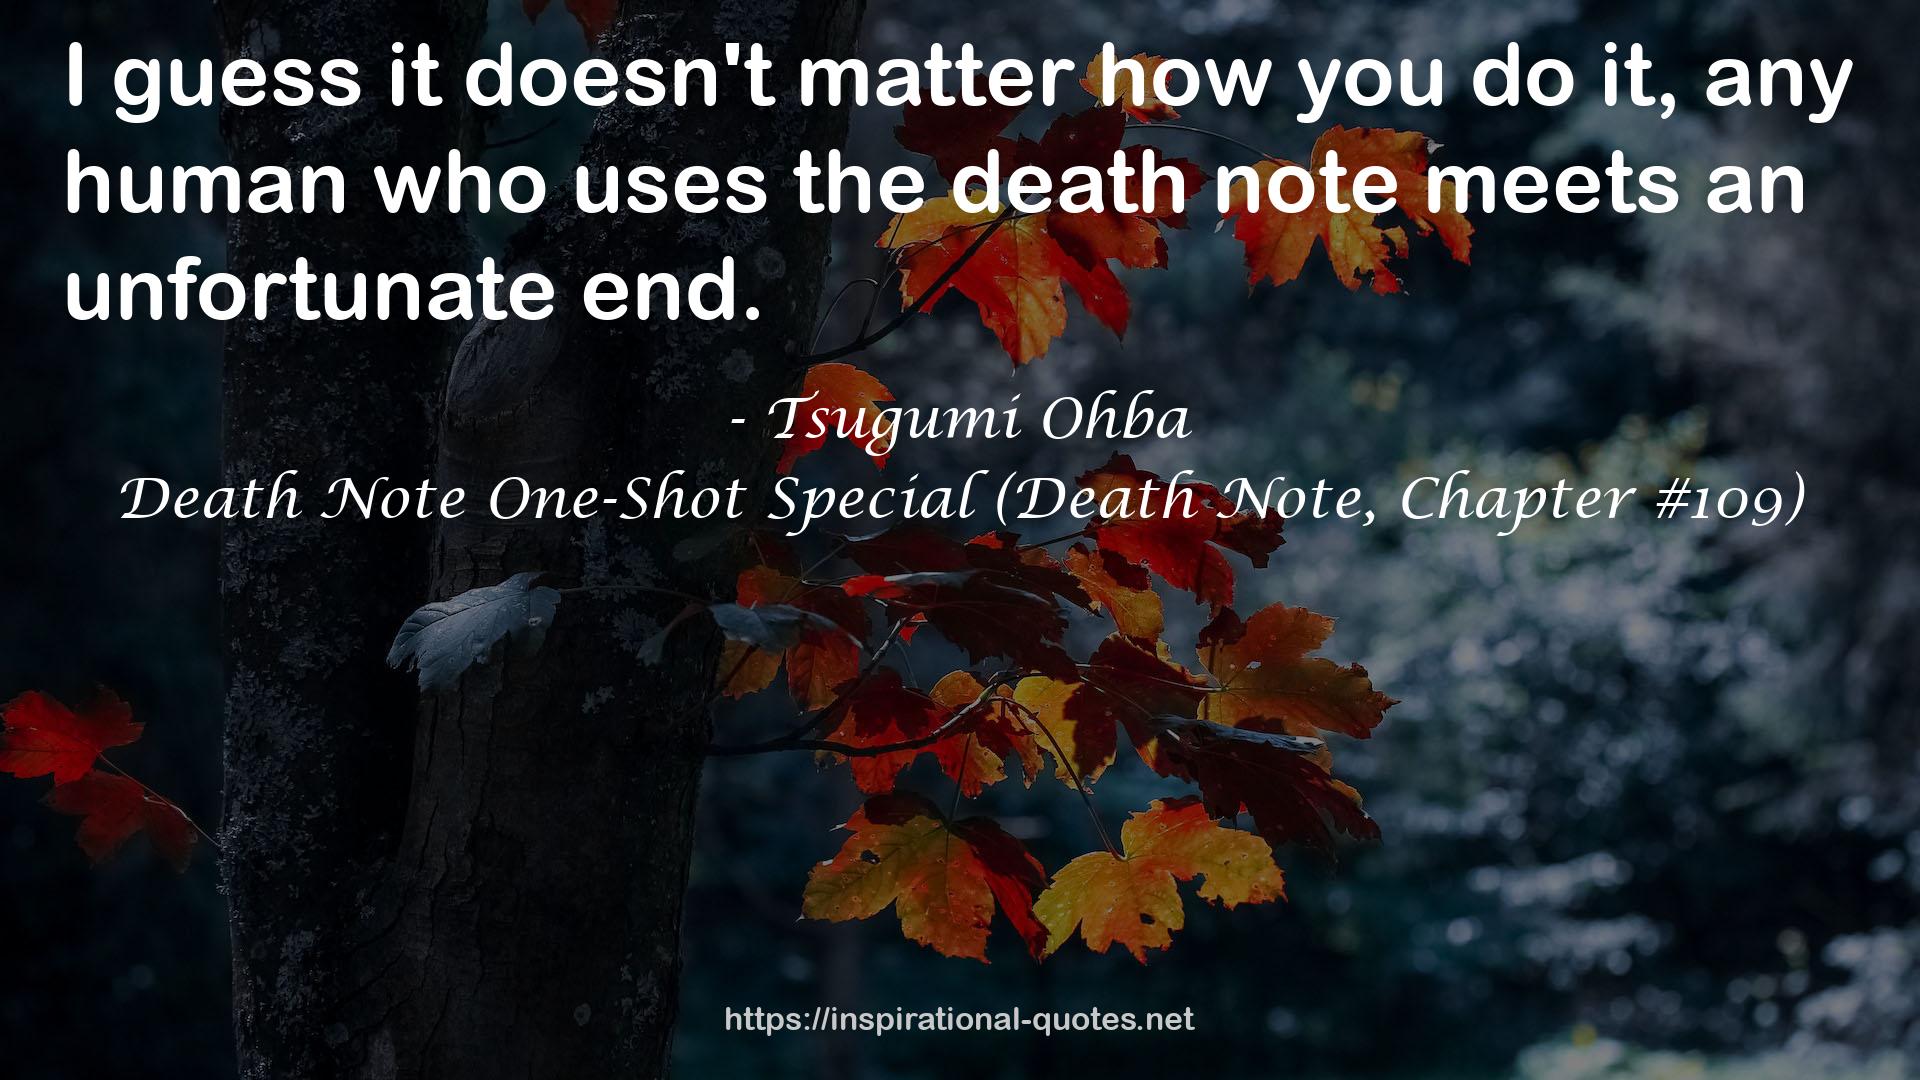 Death Note One-Shot Special (Death Note, Chapter #109) QUOTES